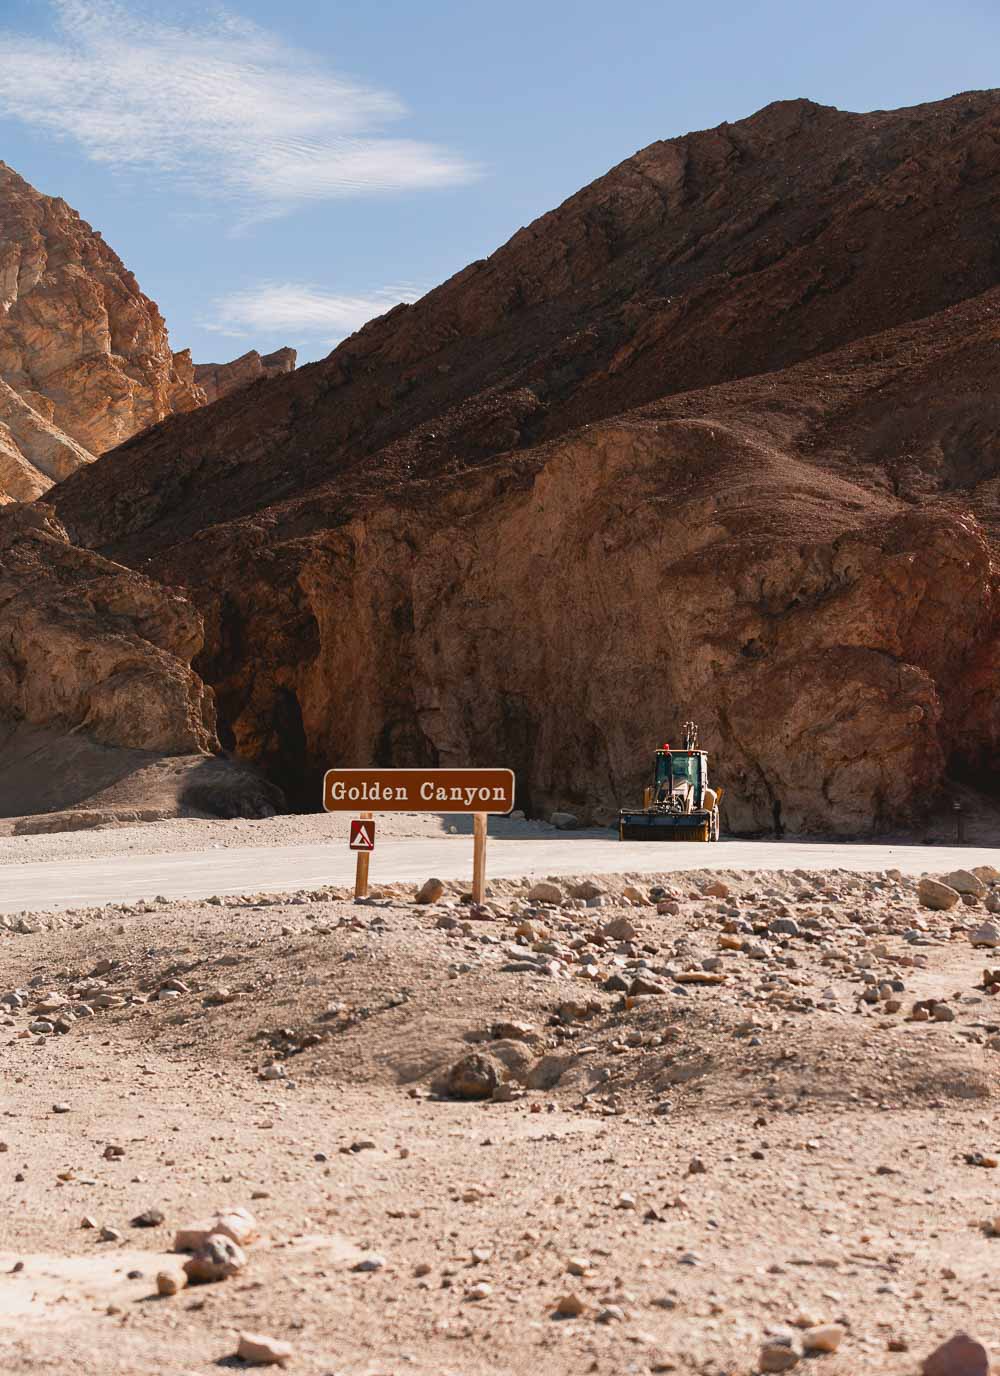 Road crew removes debris from parking lot at Golden Canyon in Death Valley - Photo Credit NPS